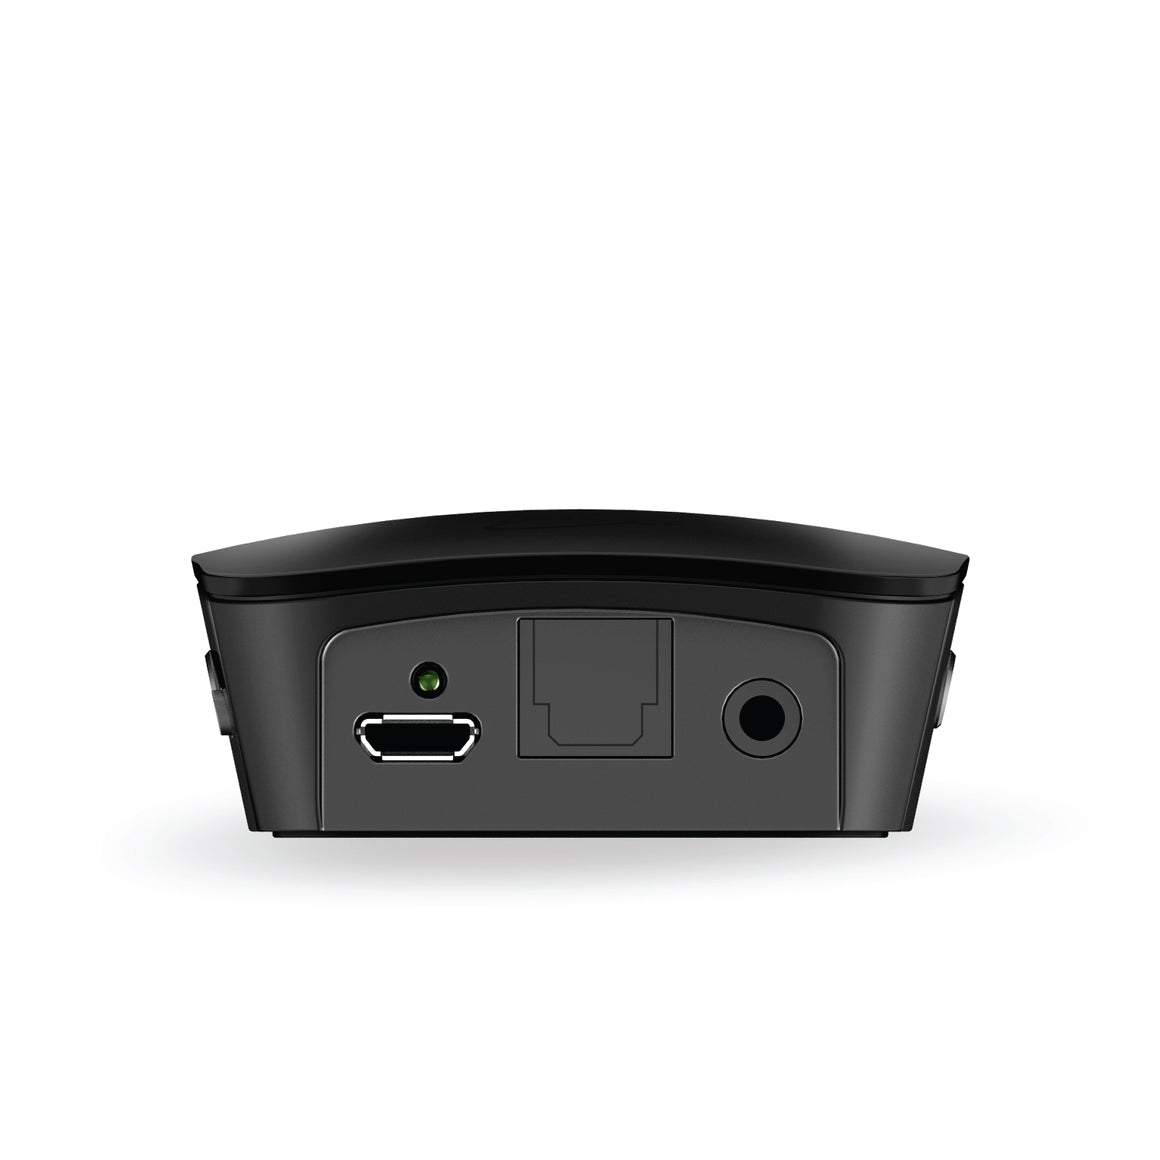 Headphone-Zone-MEE Audio-Connect Bluetooth Transmitter